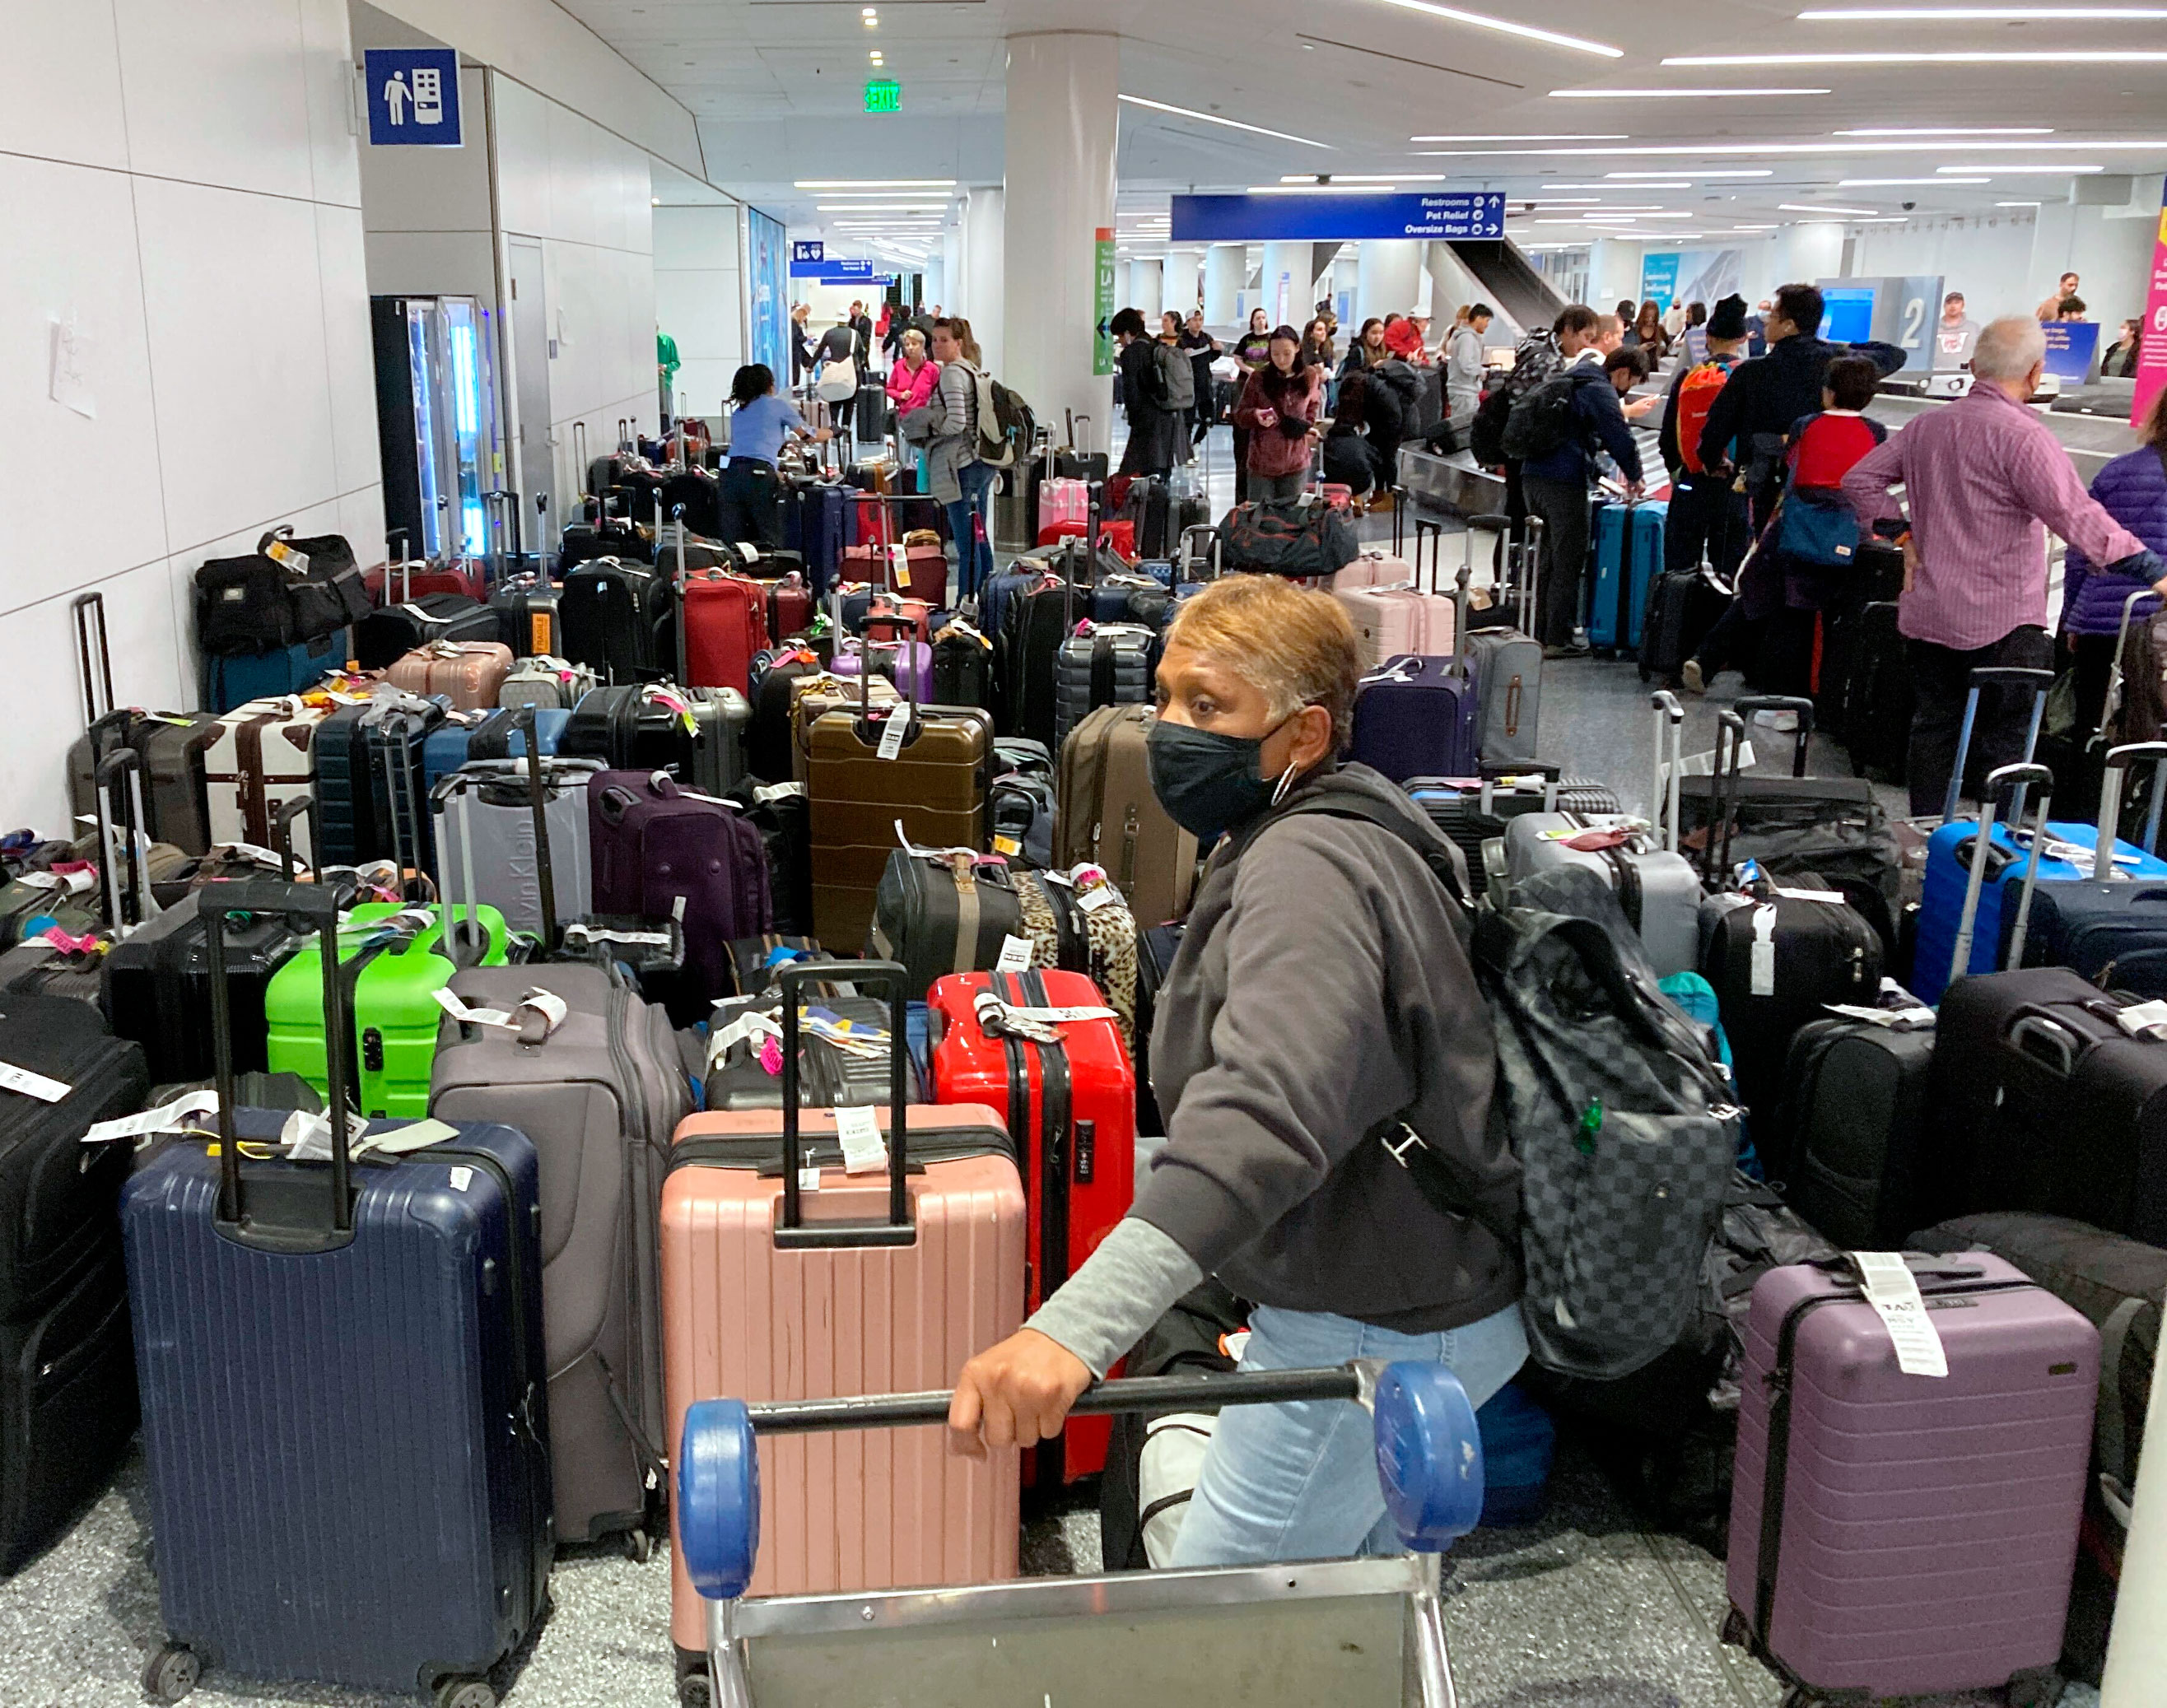 Baggage waits to be claimed at the Southwest Airlines terminal after canceled flights at the Los Angeles International Airport on Monday. 